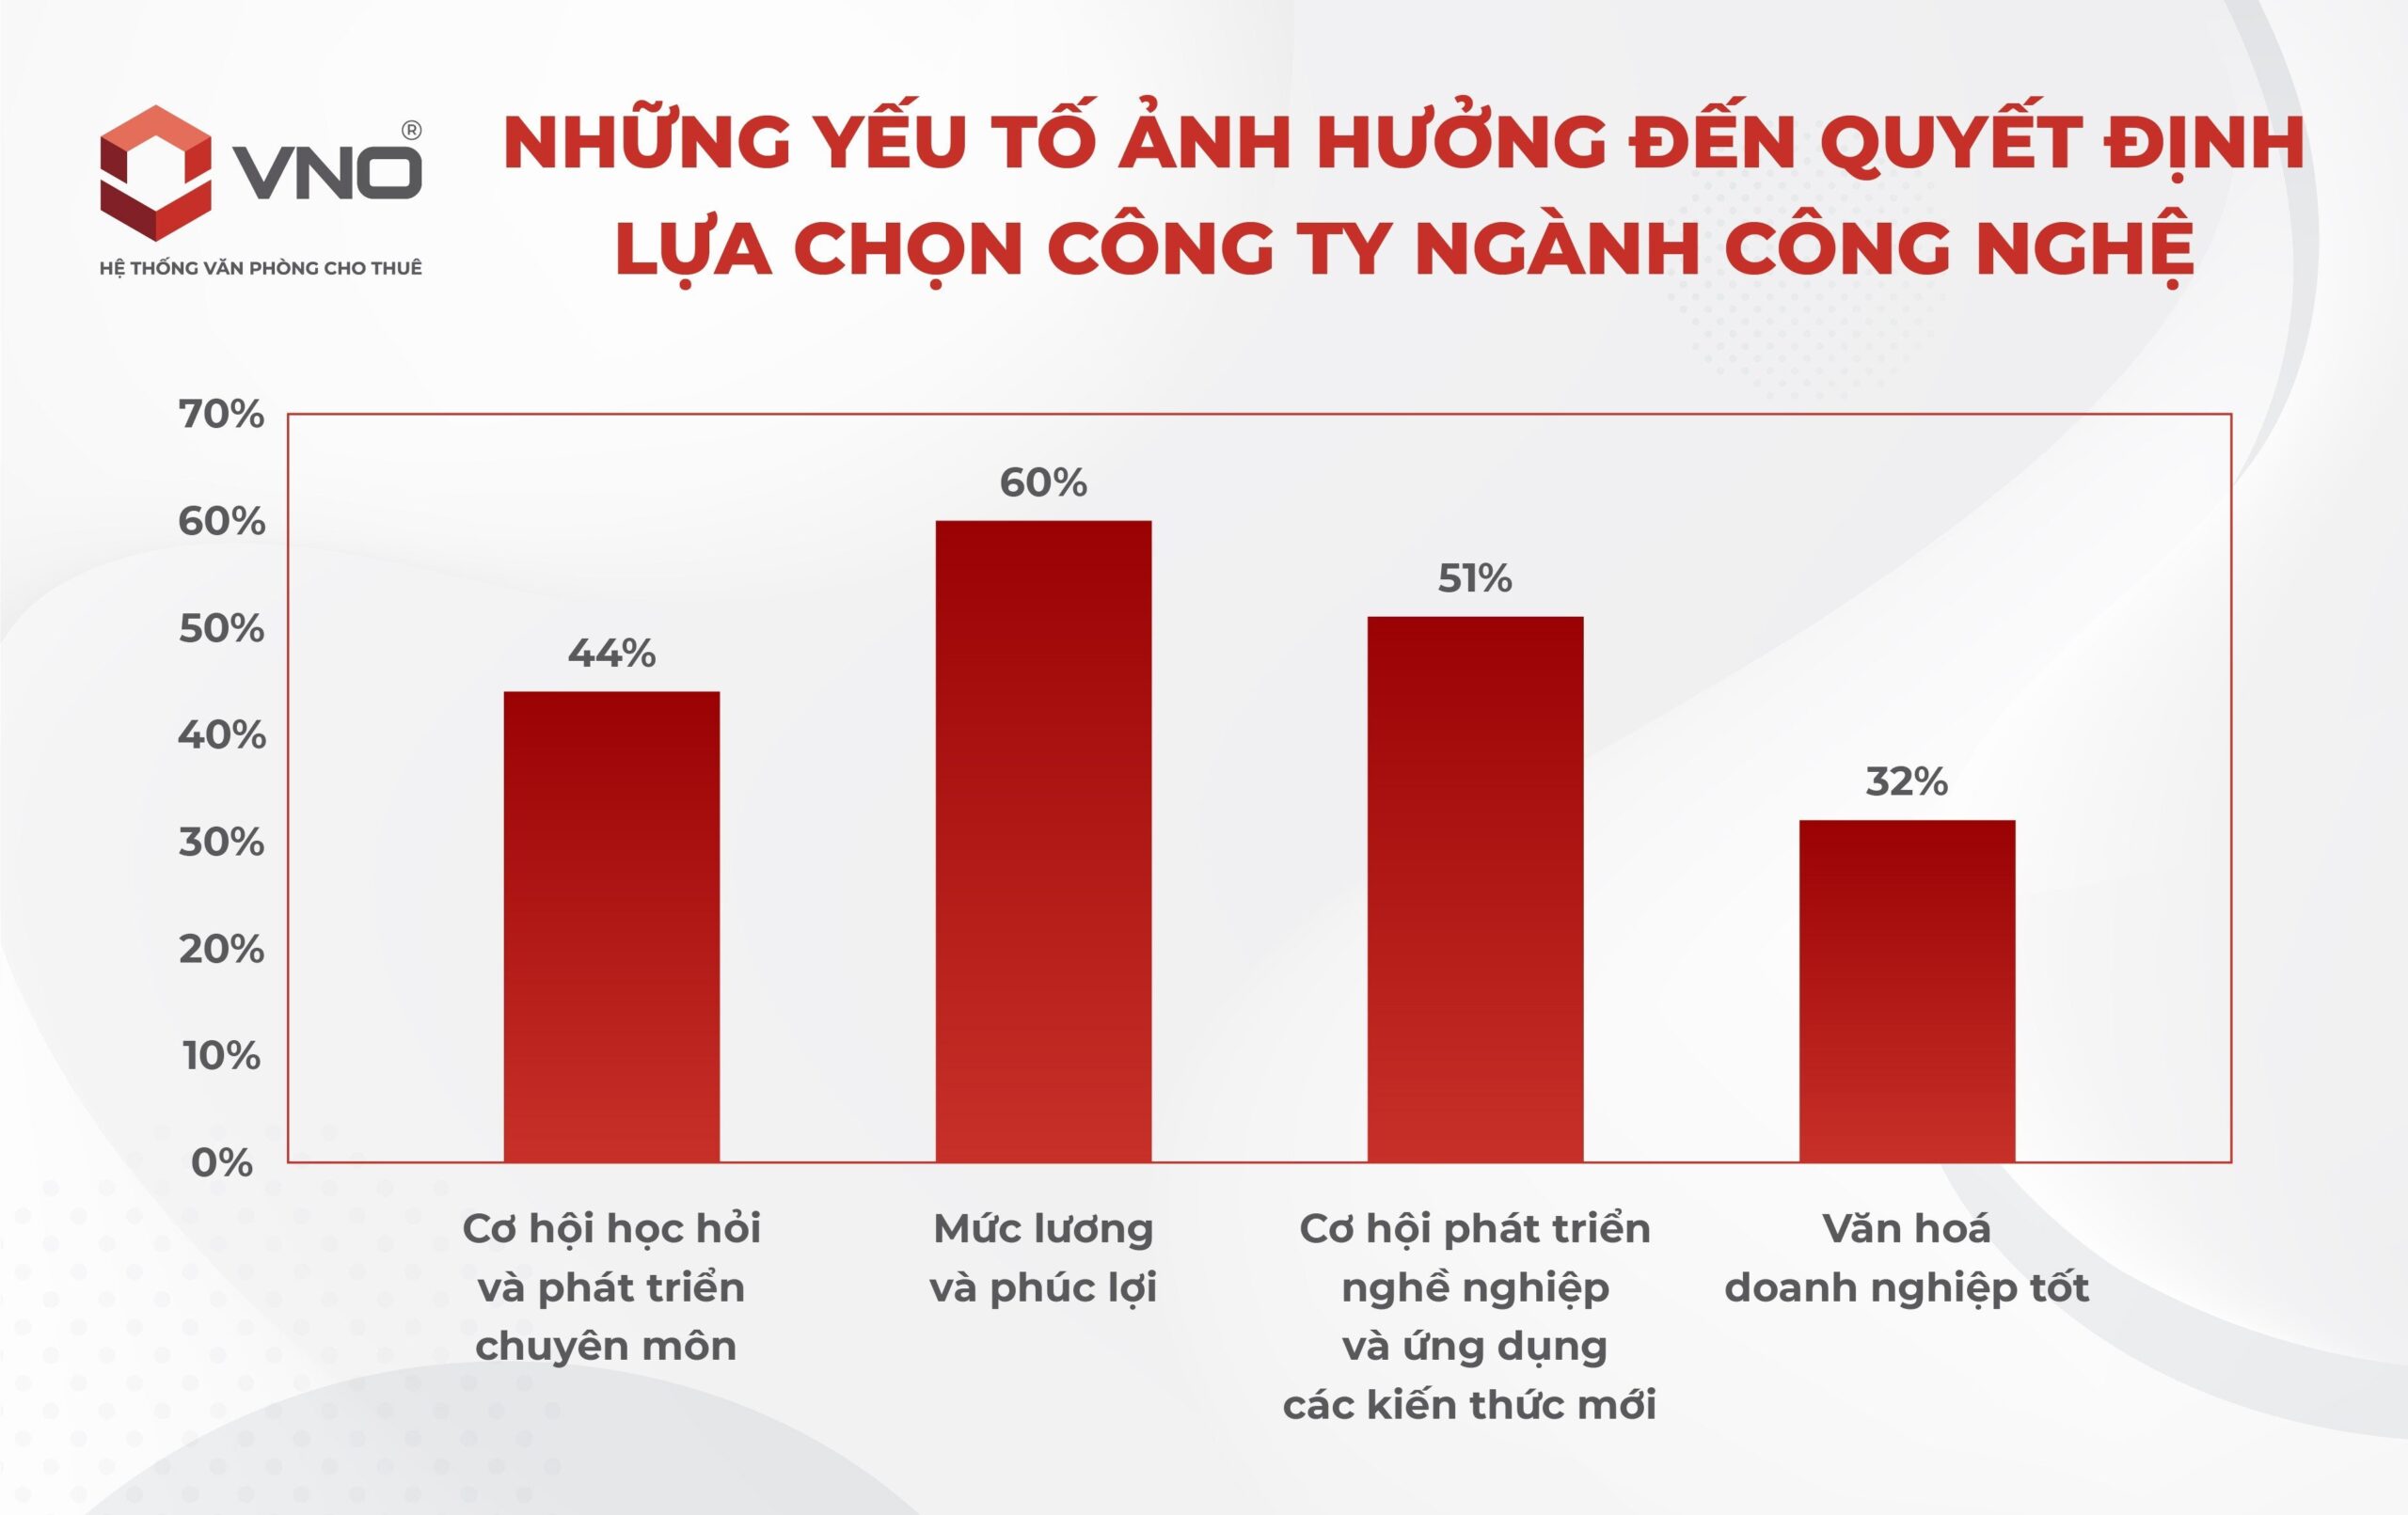 quyet-dinh-lua-chon-cong-ty-nganh-cong-nghe